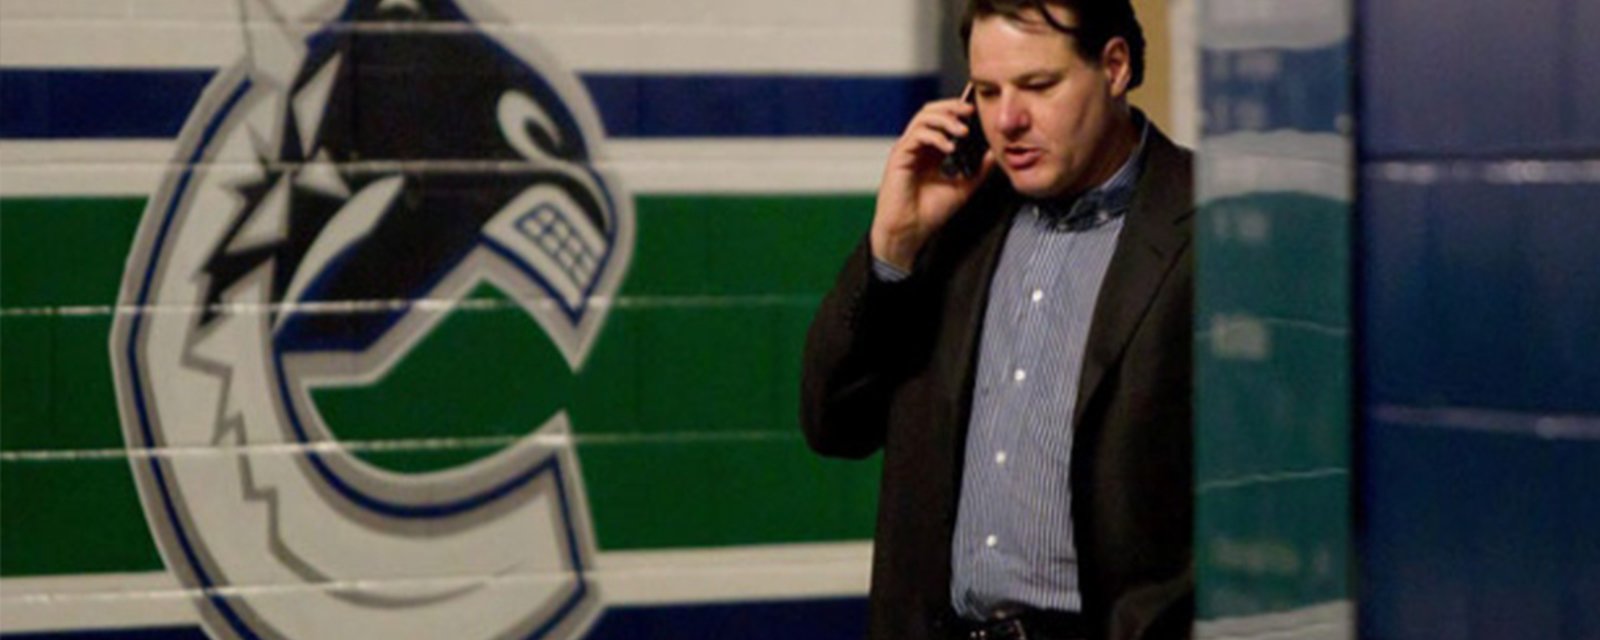 Breaking: Massive upheaval in Canucks management stemming from owner Aquilini 